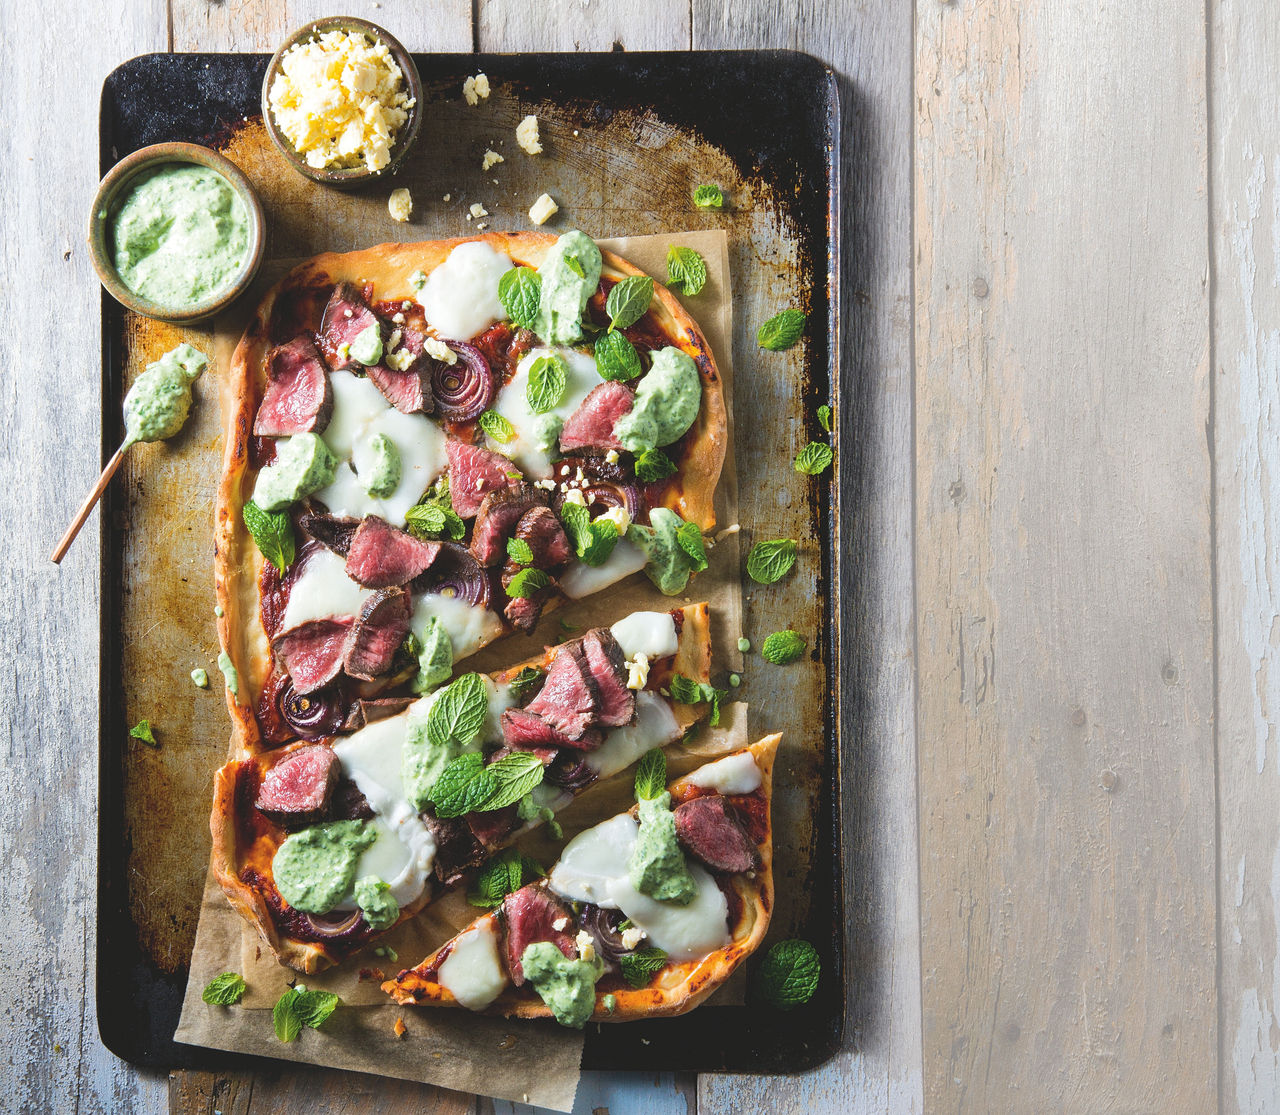 Lamb and Mint Pizza. Homecook of the Year
Mindfood Issue September 2017